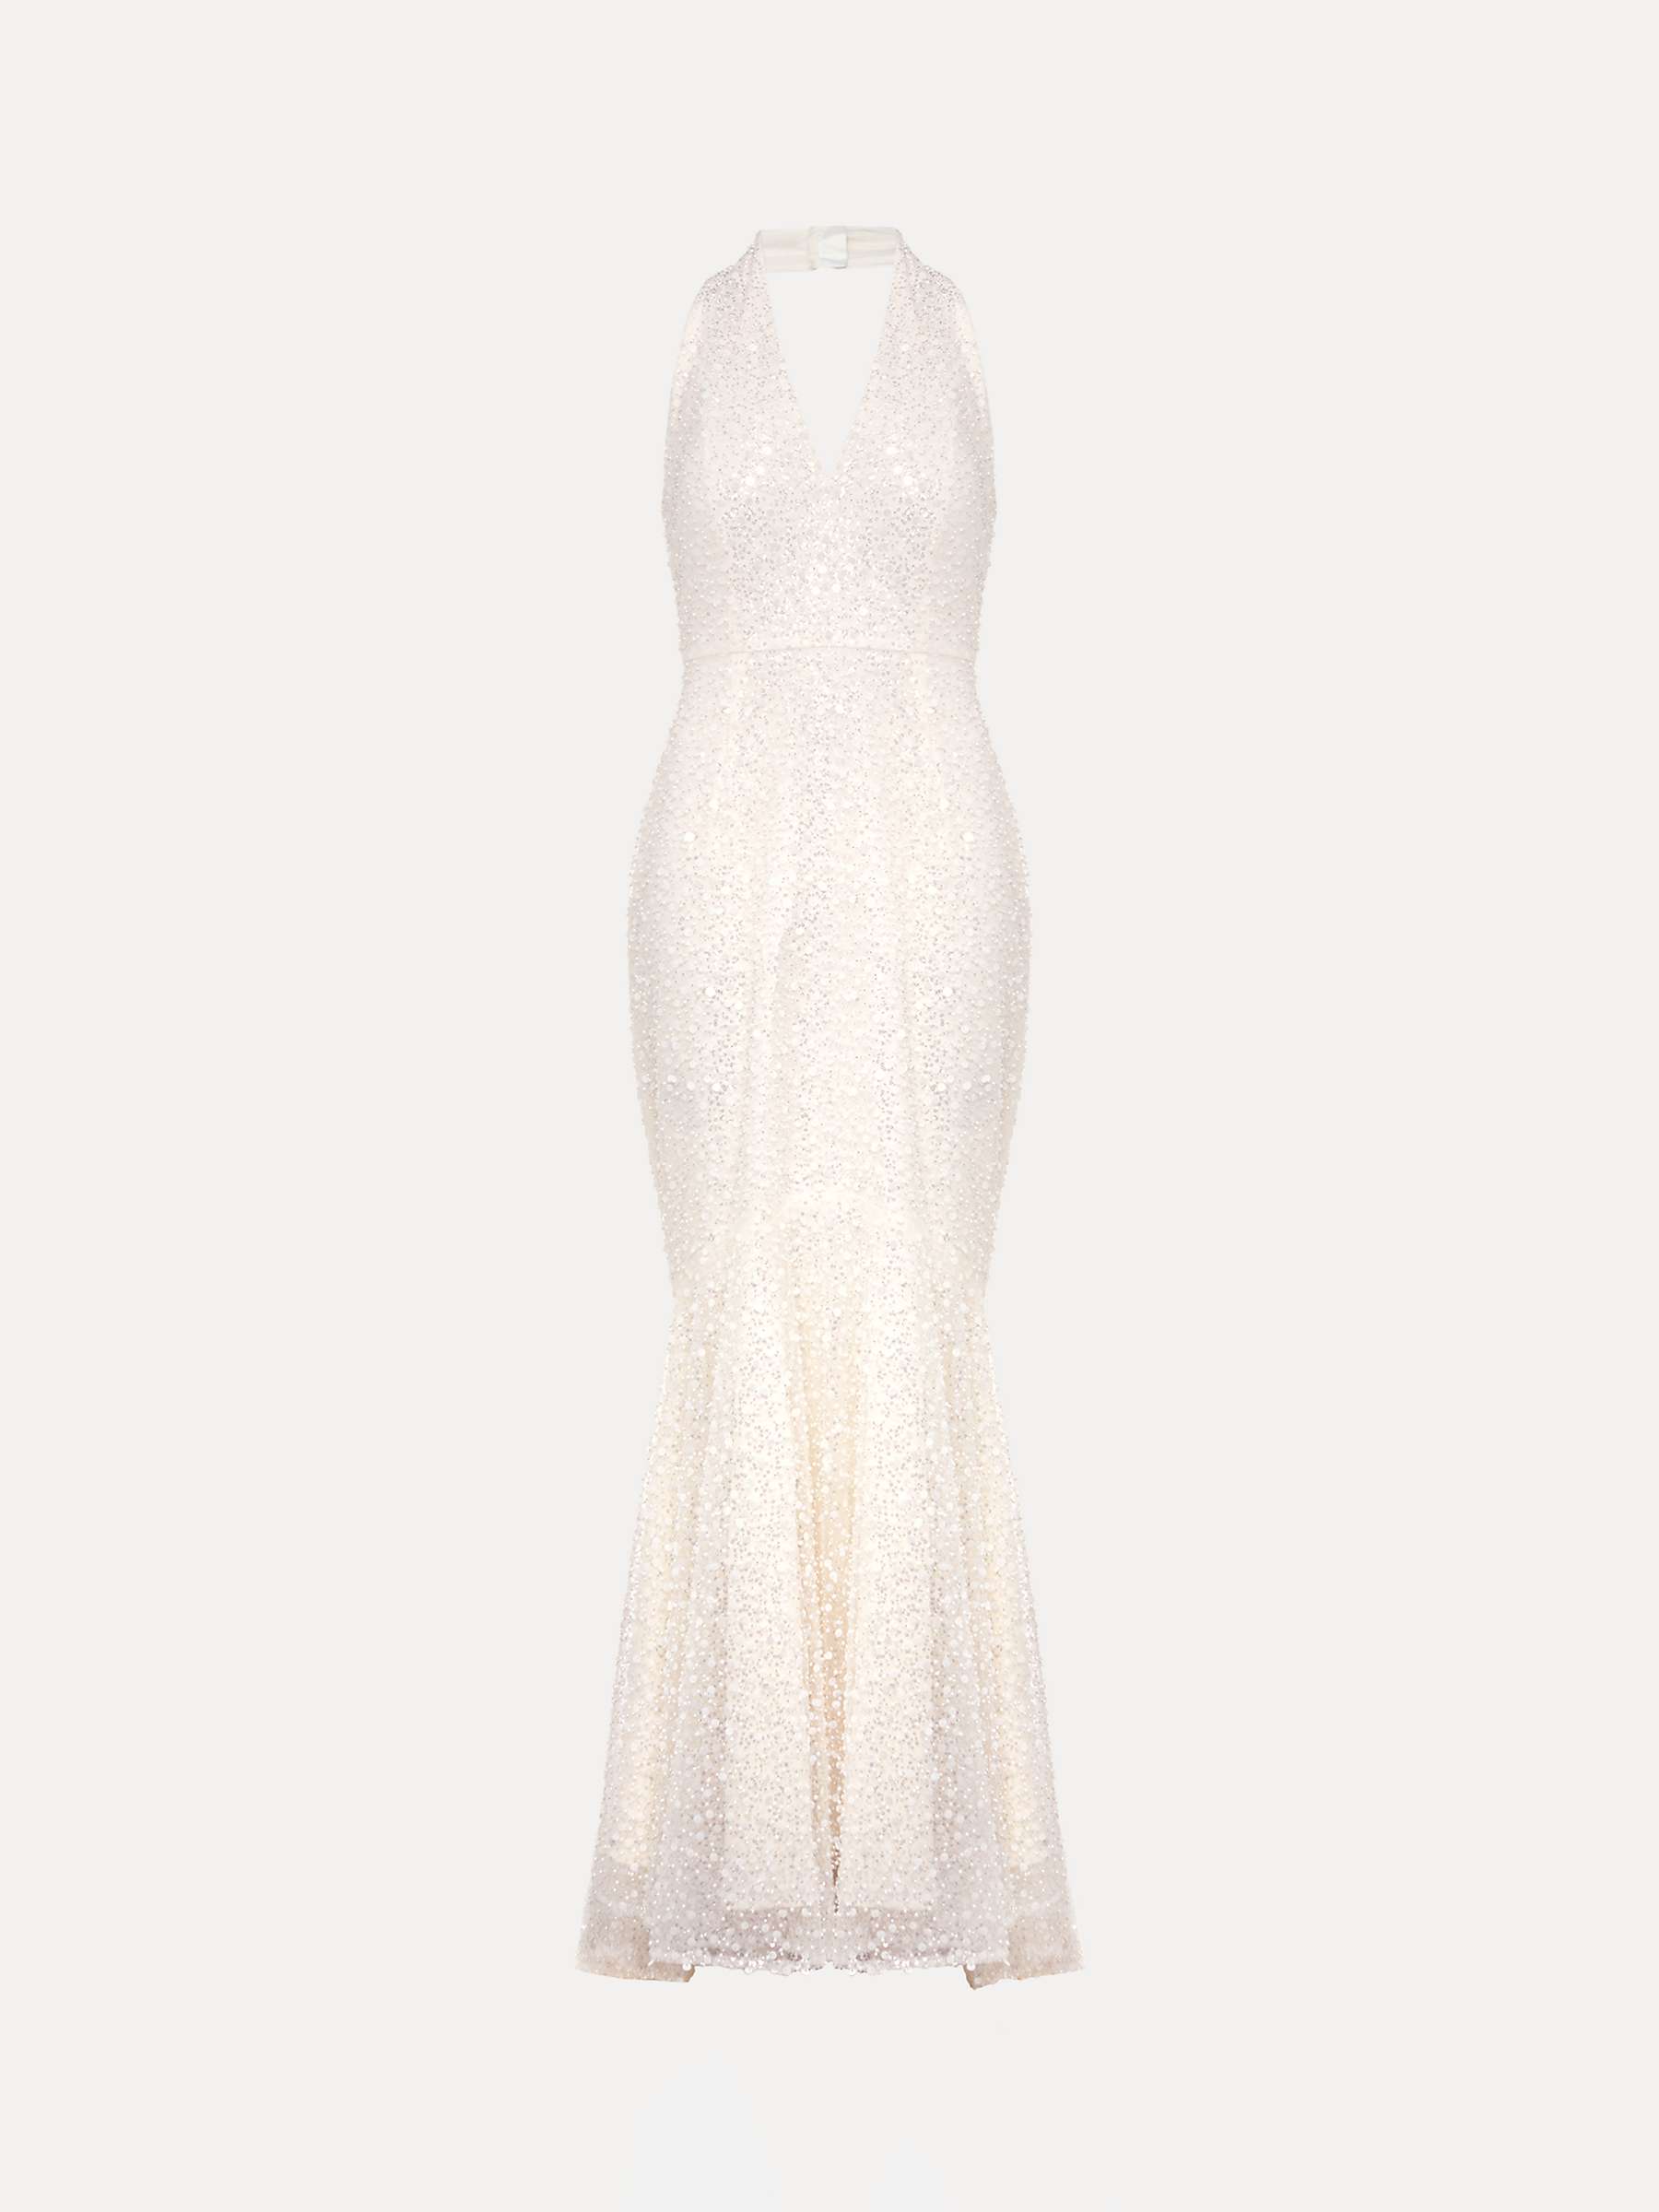 Buy Phase Eight Guinevere Sequin Wedding Dress, Ivory Online at johnlewis.com